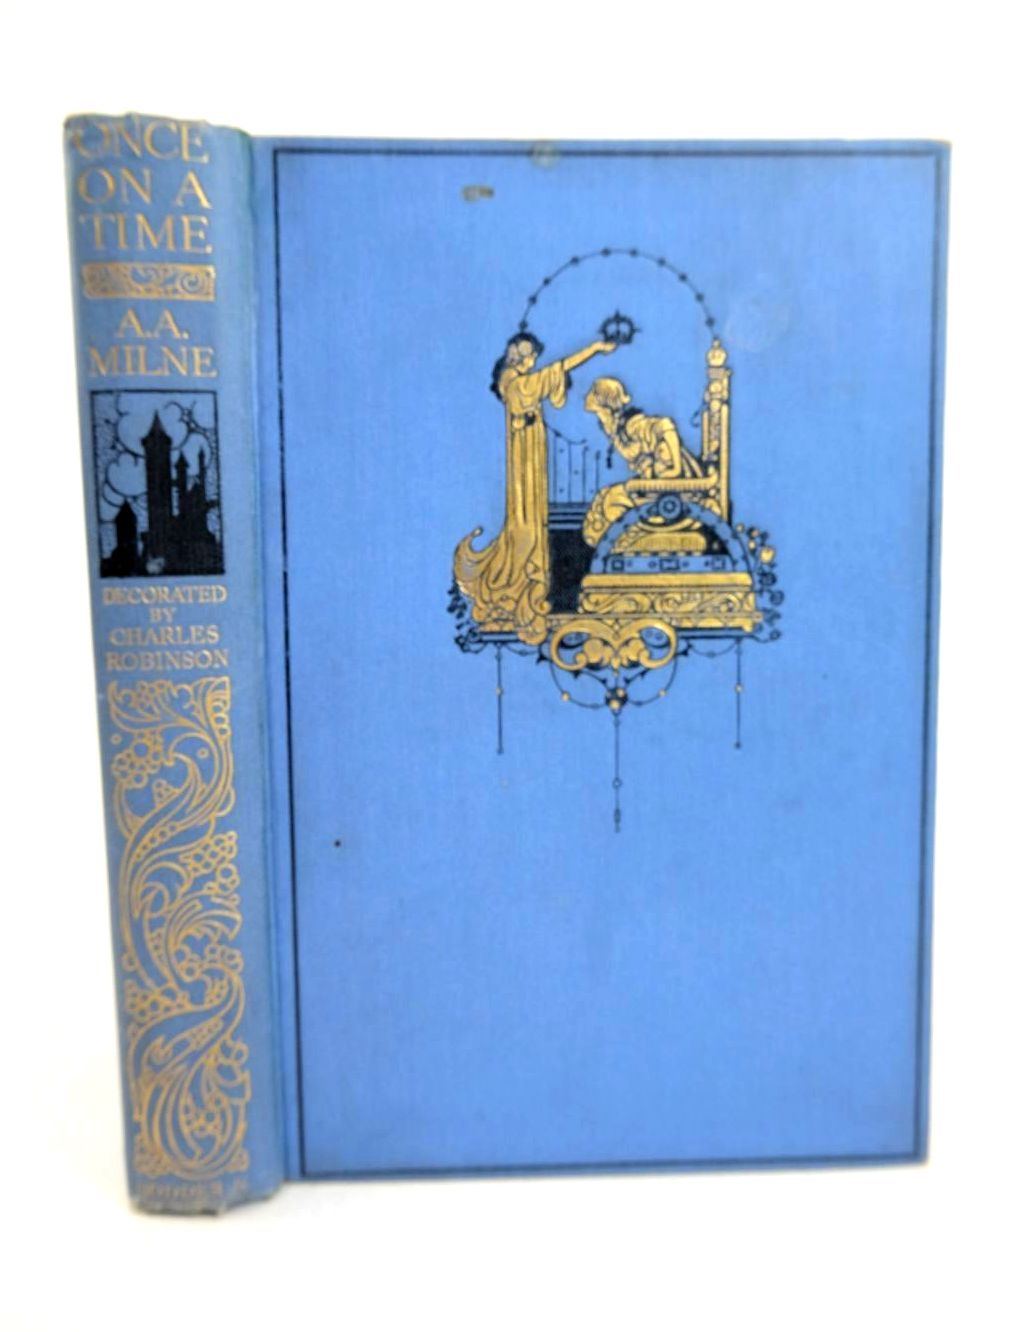 Photo of ONCE ON A TIME written by Milne, A.A. illustrated by Robinson, Charles published by Hodder &amp; Stoughton (STOCK CODE: 1318726)  for sale by Stella & Rose's Books